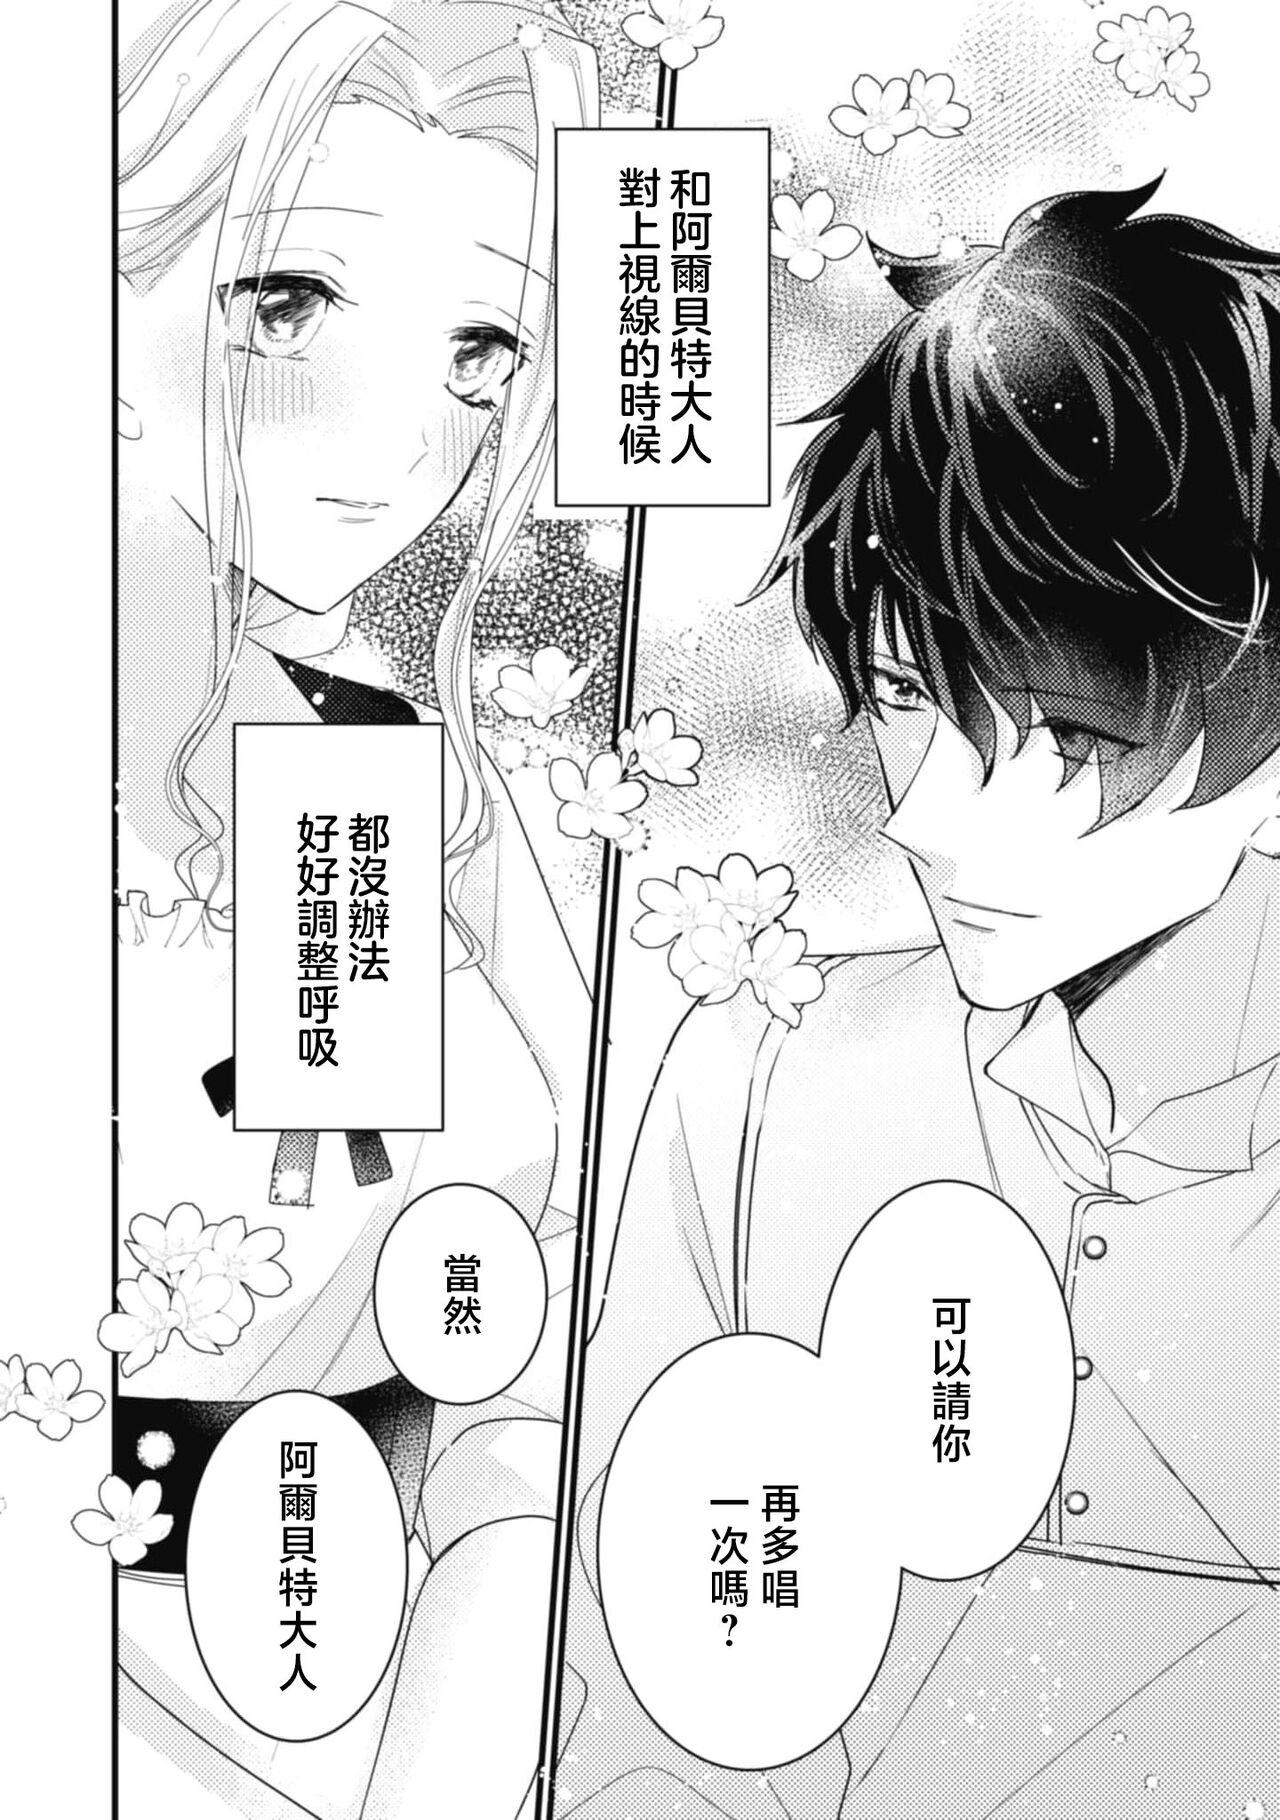 A shepherd in love with a demoted knight | 与被贬骑士相爱的牧羊女1 34